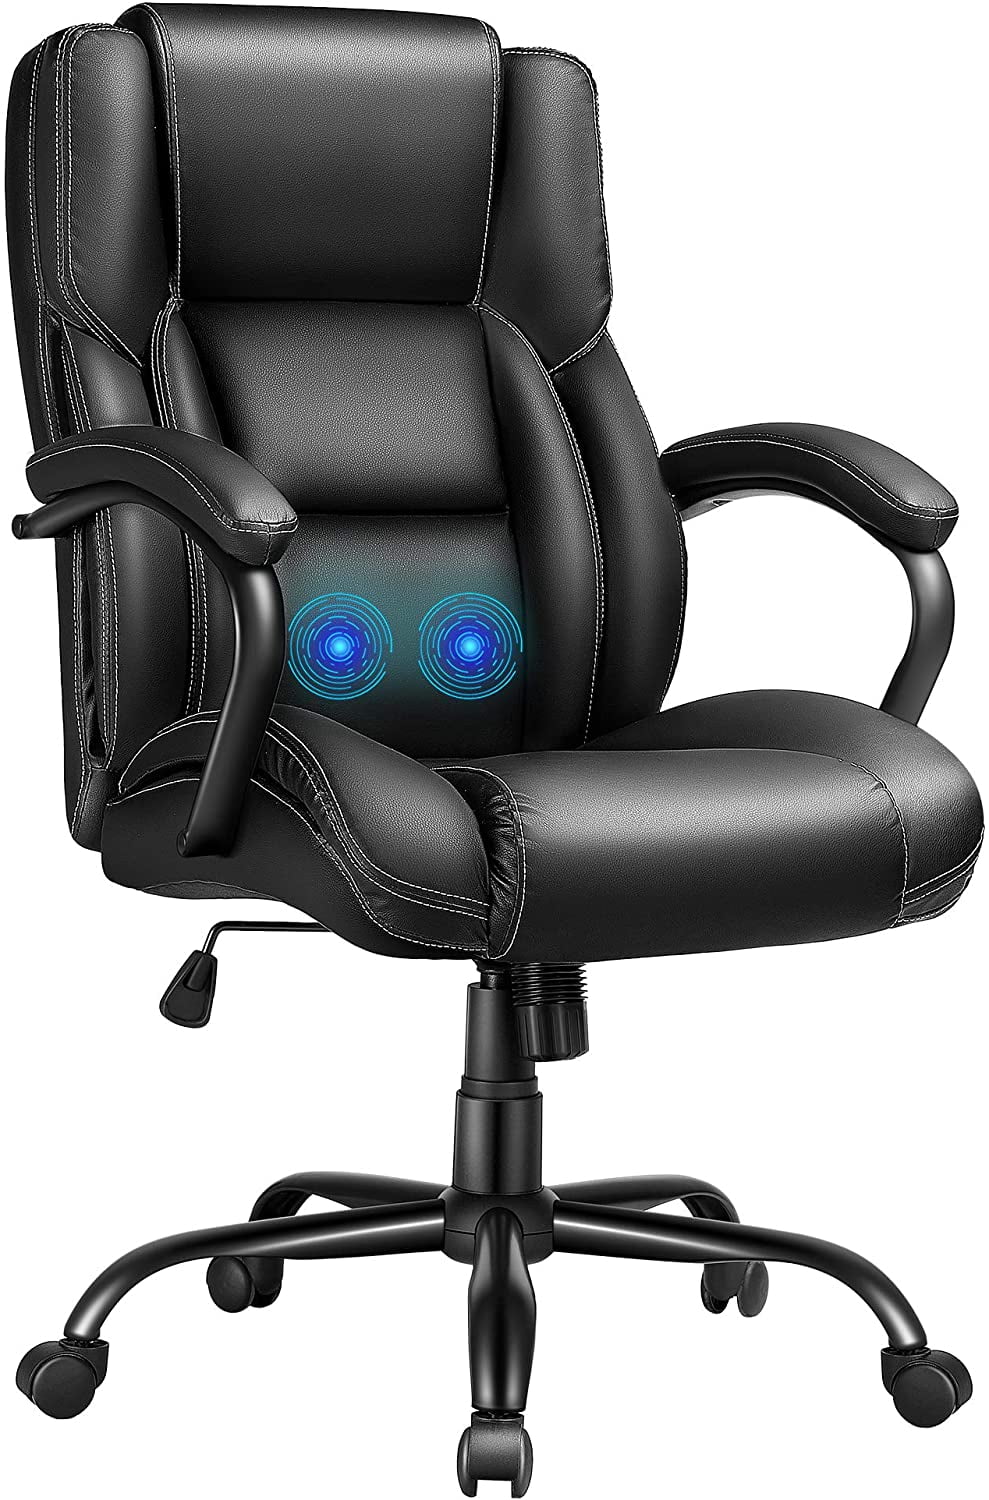 High Back Executive Large Leather Computer Chair with Lumbar Support Kealive Big and Tall Office Chair 400 lbs Heavy Duty Adjustable Wide Seat Ergonomic Massage Chair for Heavy People Black